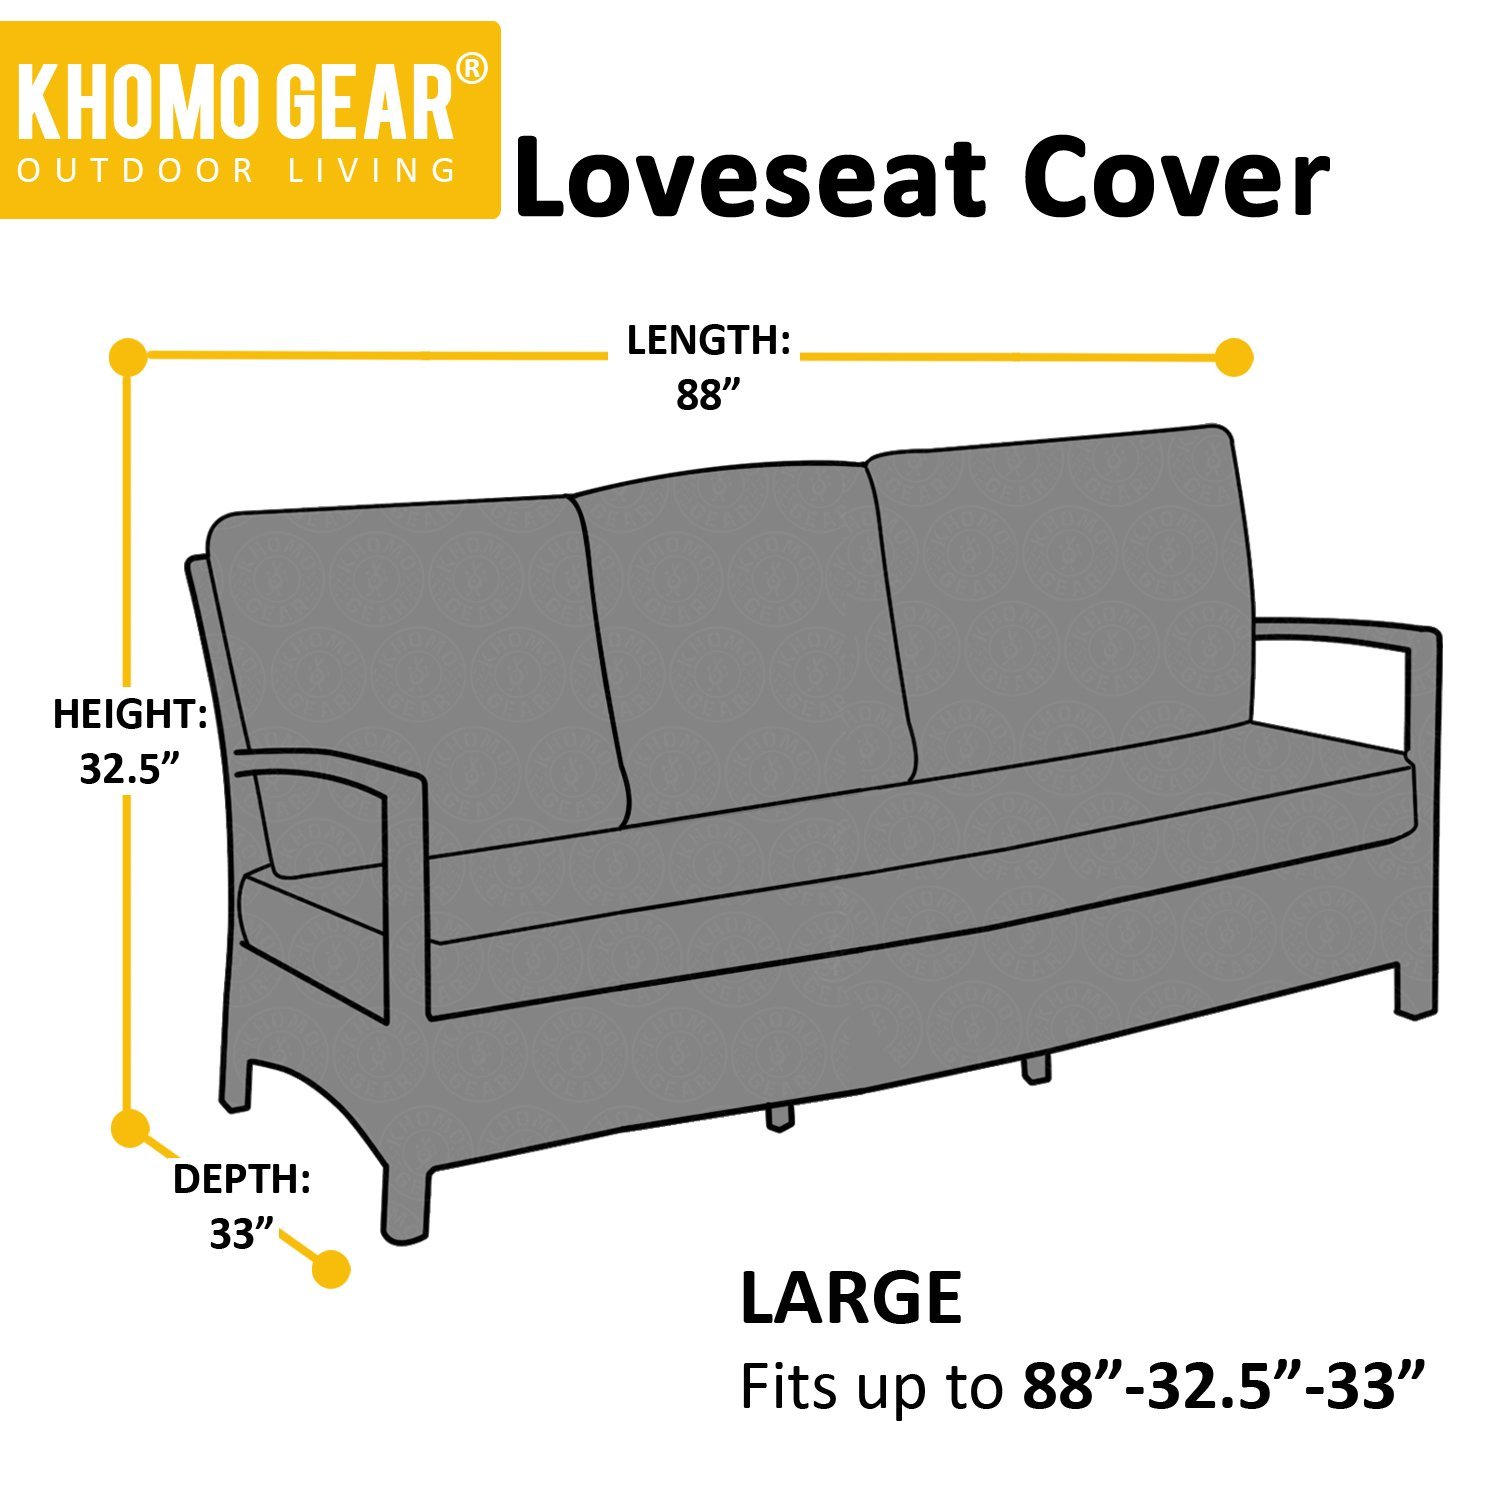 Outdoor Sofa Cover 88" x 32" x 33" Weatherproof Loveseat Outdoor Couch Patio Furniture Protector Large - Black - image 3 of 5